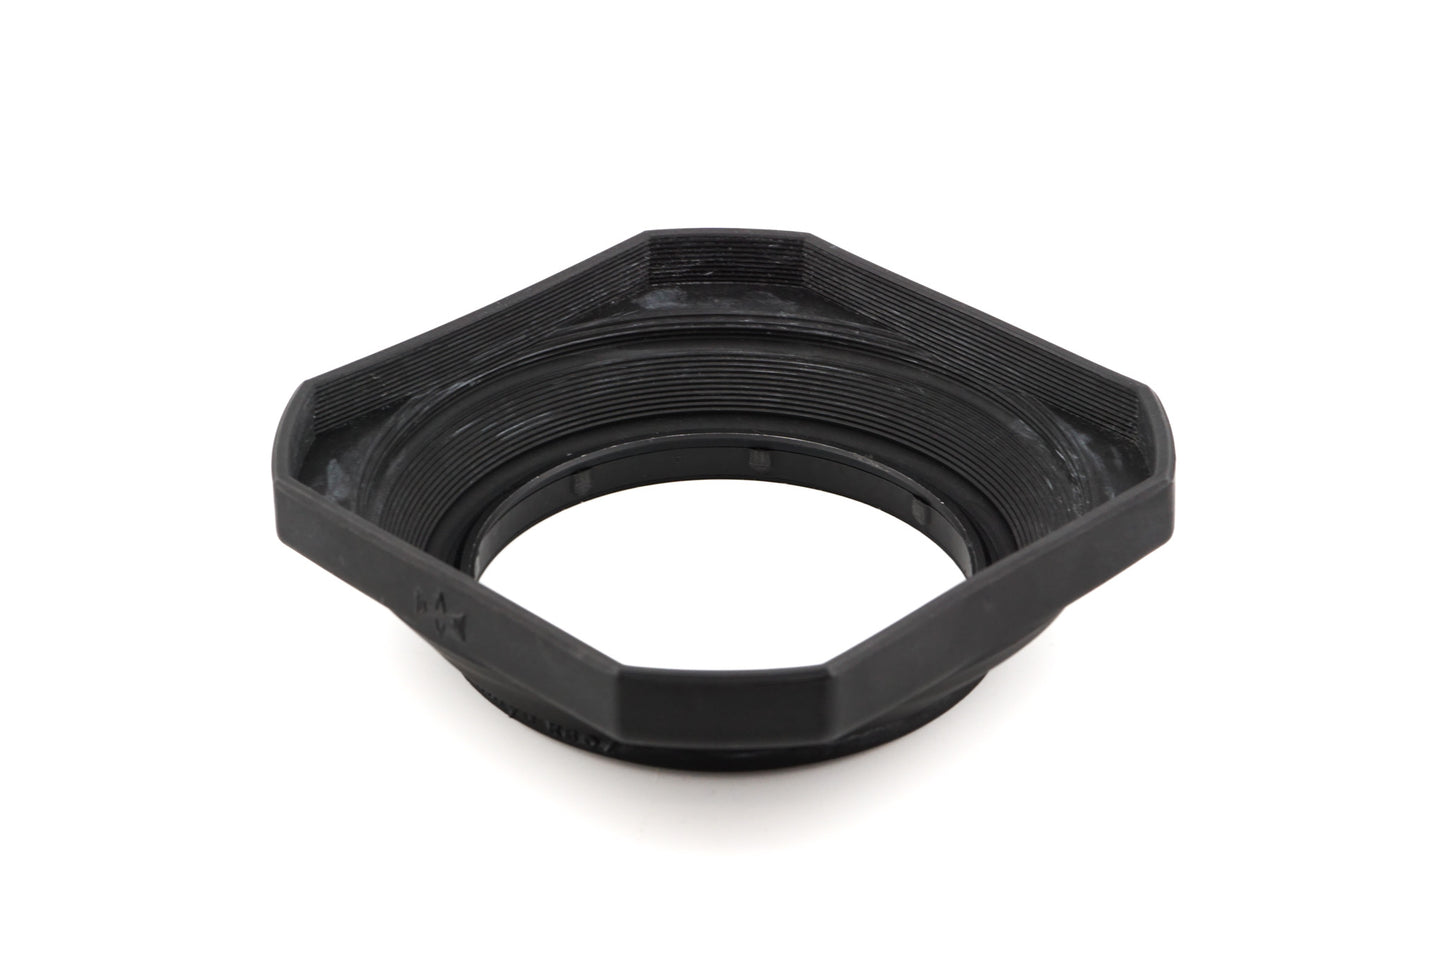 Mamiya Rubber Lens Hood for 50mm / 65mm (RZ67/RB67) and 45mm (M645)